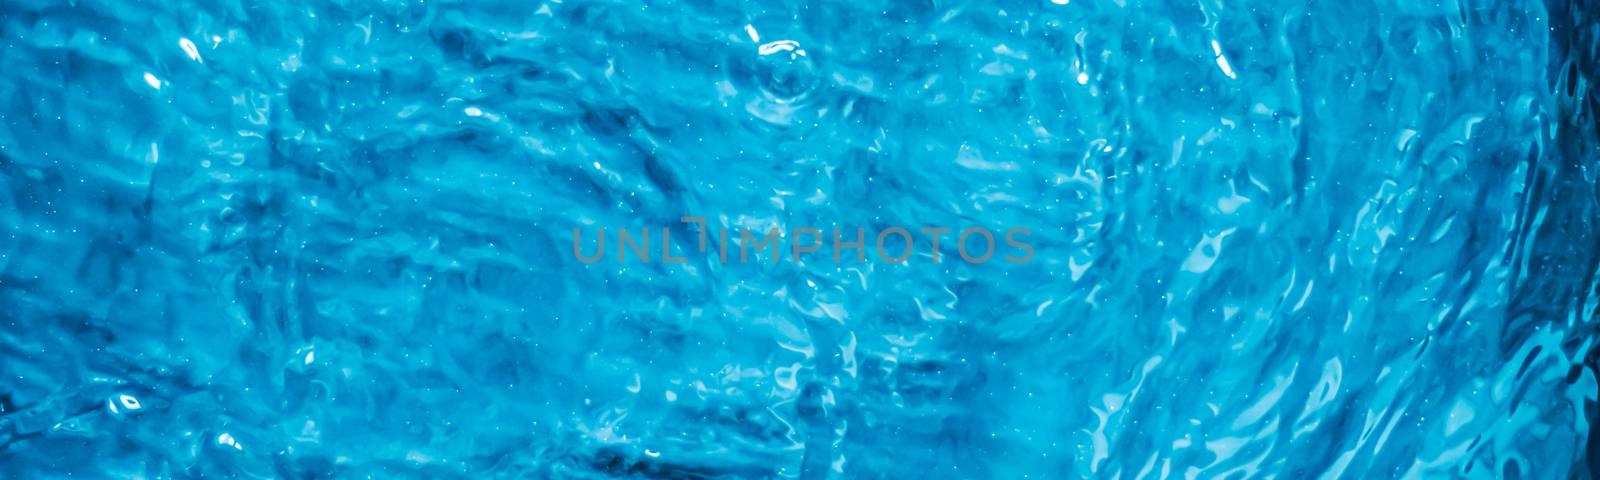 Blue water texture as abstract background, swimming pool and wav by Anneleven